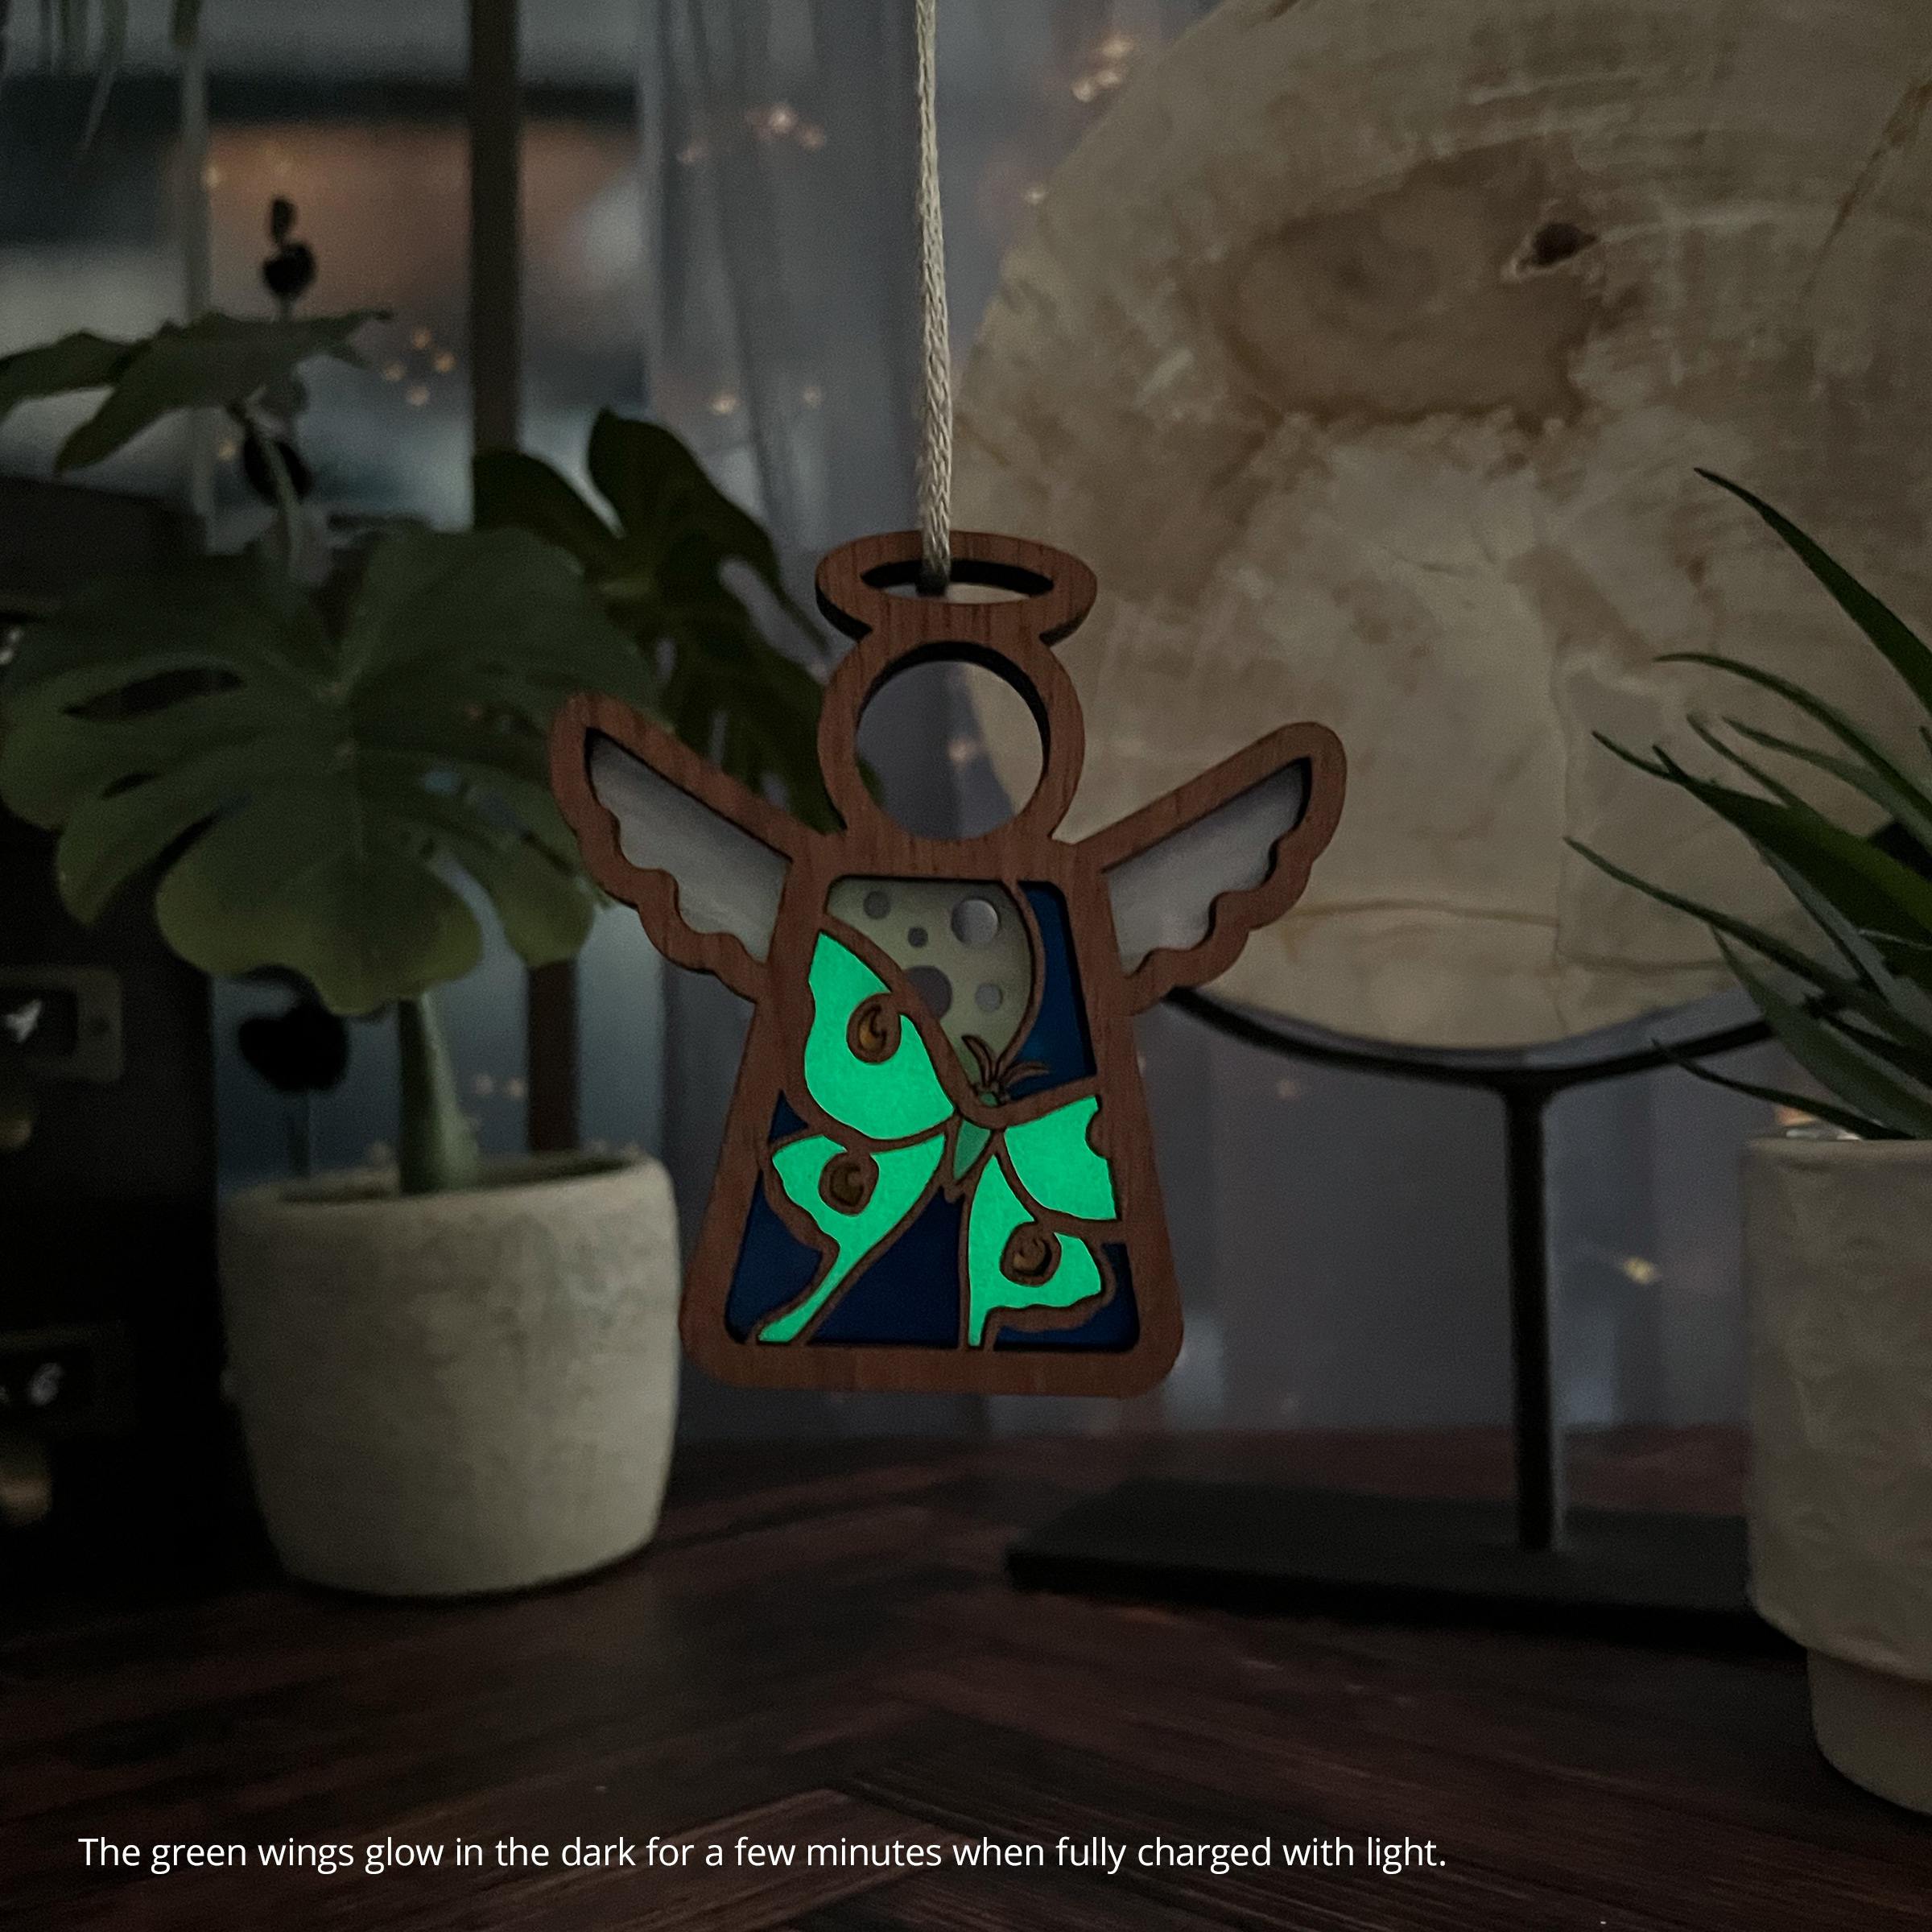 A glow-in-the-dark Luna Moth Mother’s Angels® ornament sitting on a desk in the twilight. The green wings glow in the dark for a few minutes when fully charged with light.